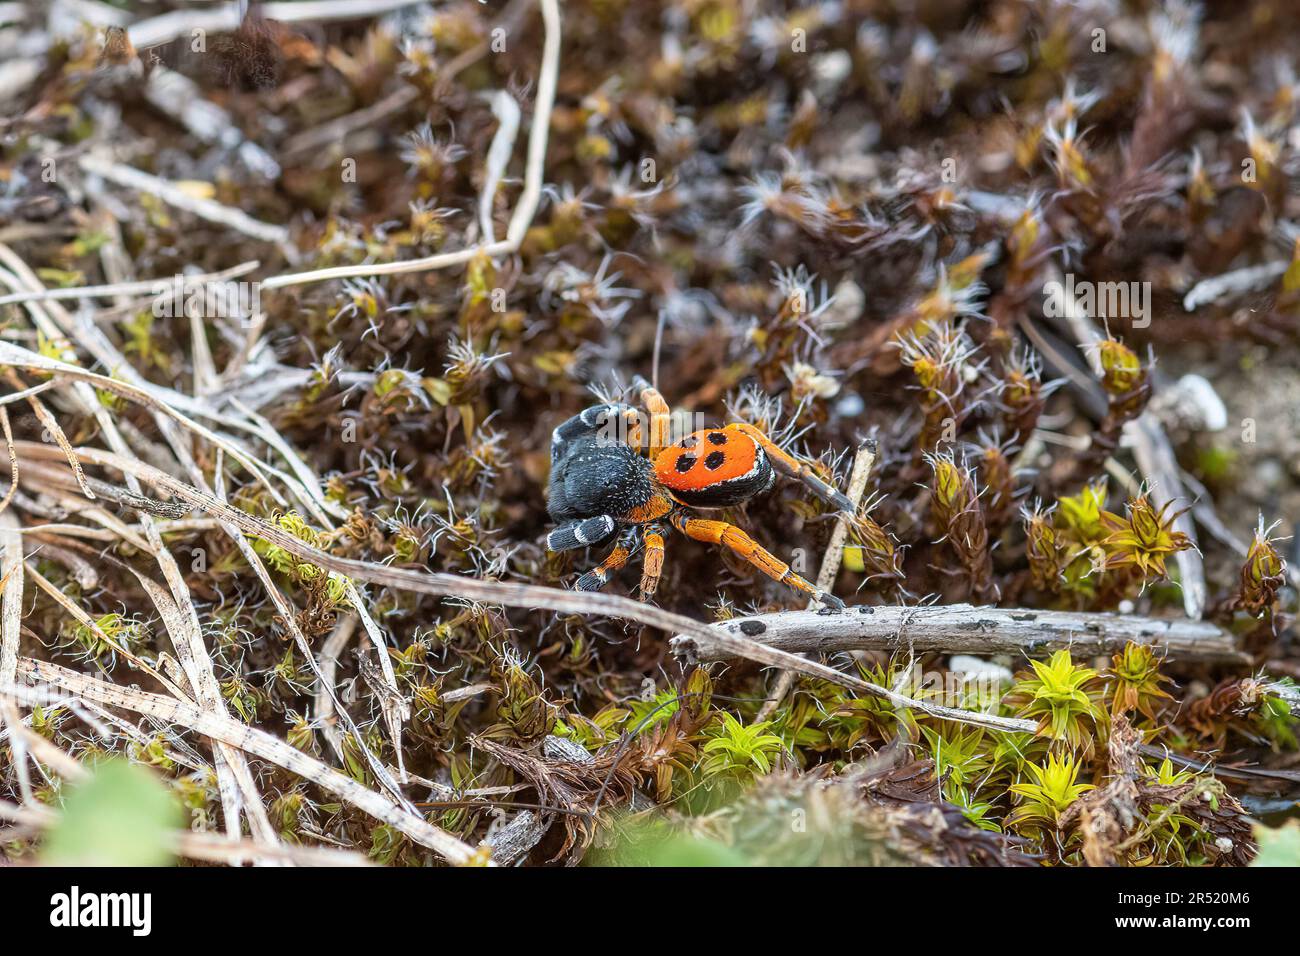 Ladybird spider (Eresus kollari), a brightly coloured spider in the Eresidae family, in Central Italy, Europe Stock Photo